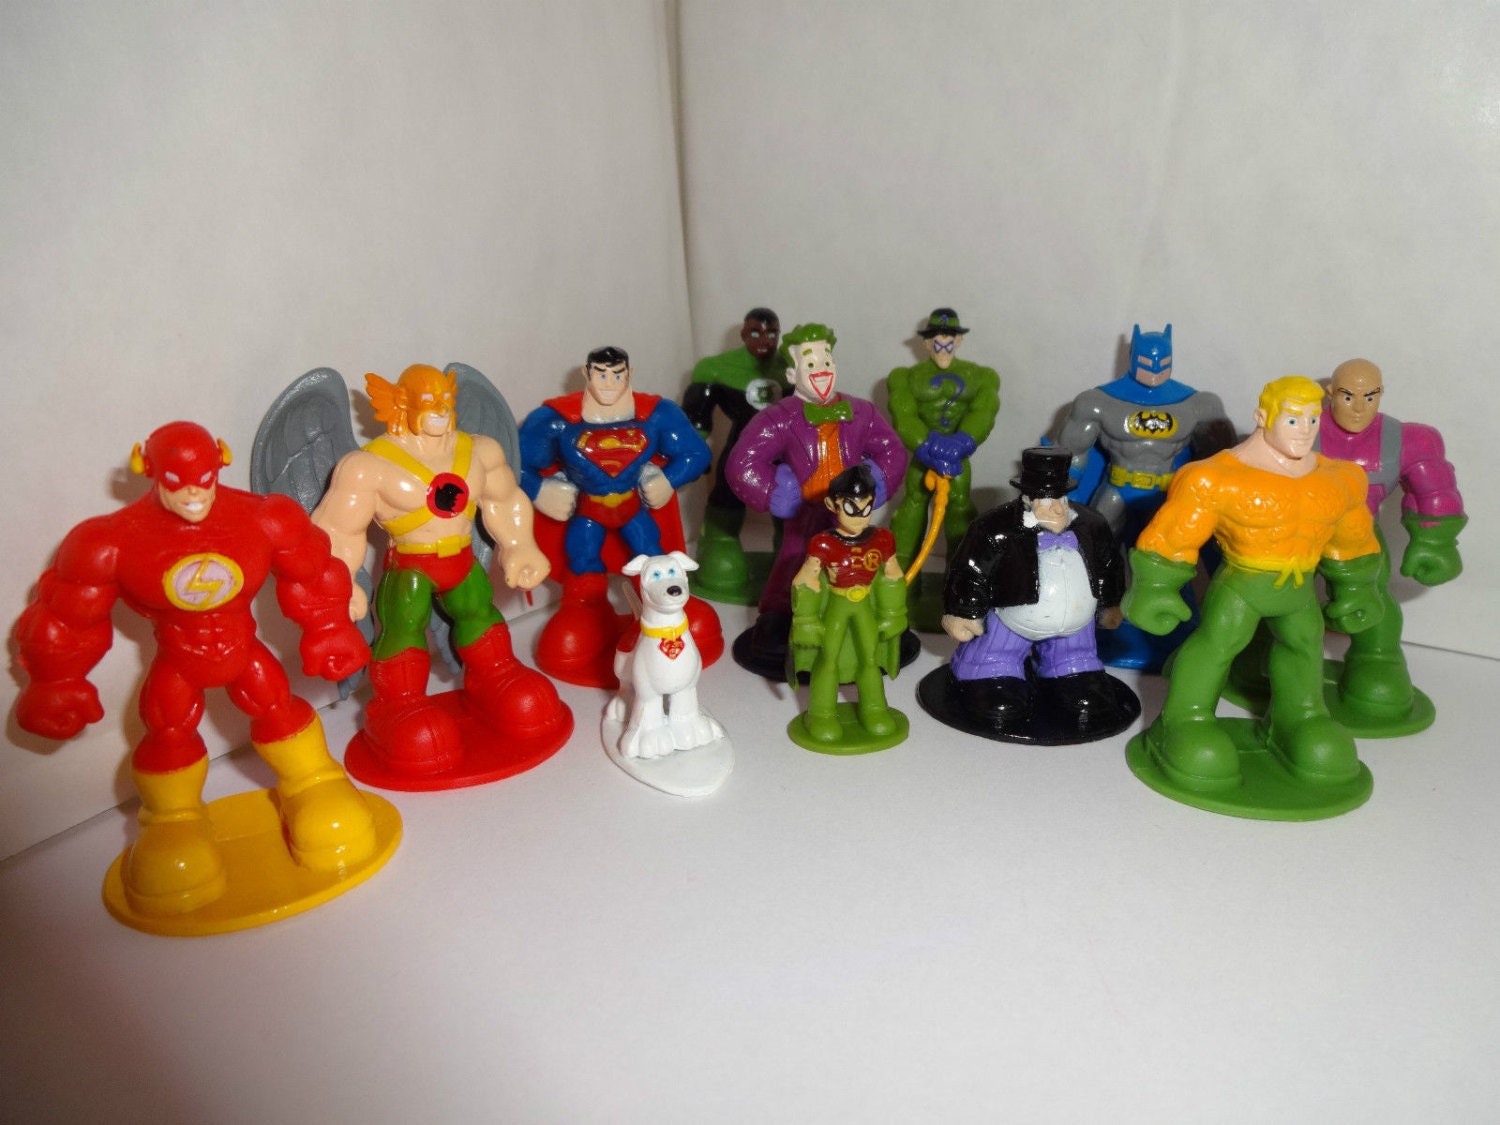 Mister A Gift DC Super Friends set of 12 plastic Cake Toppers | Etsy